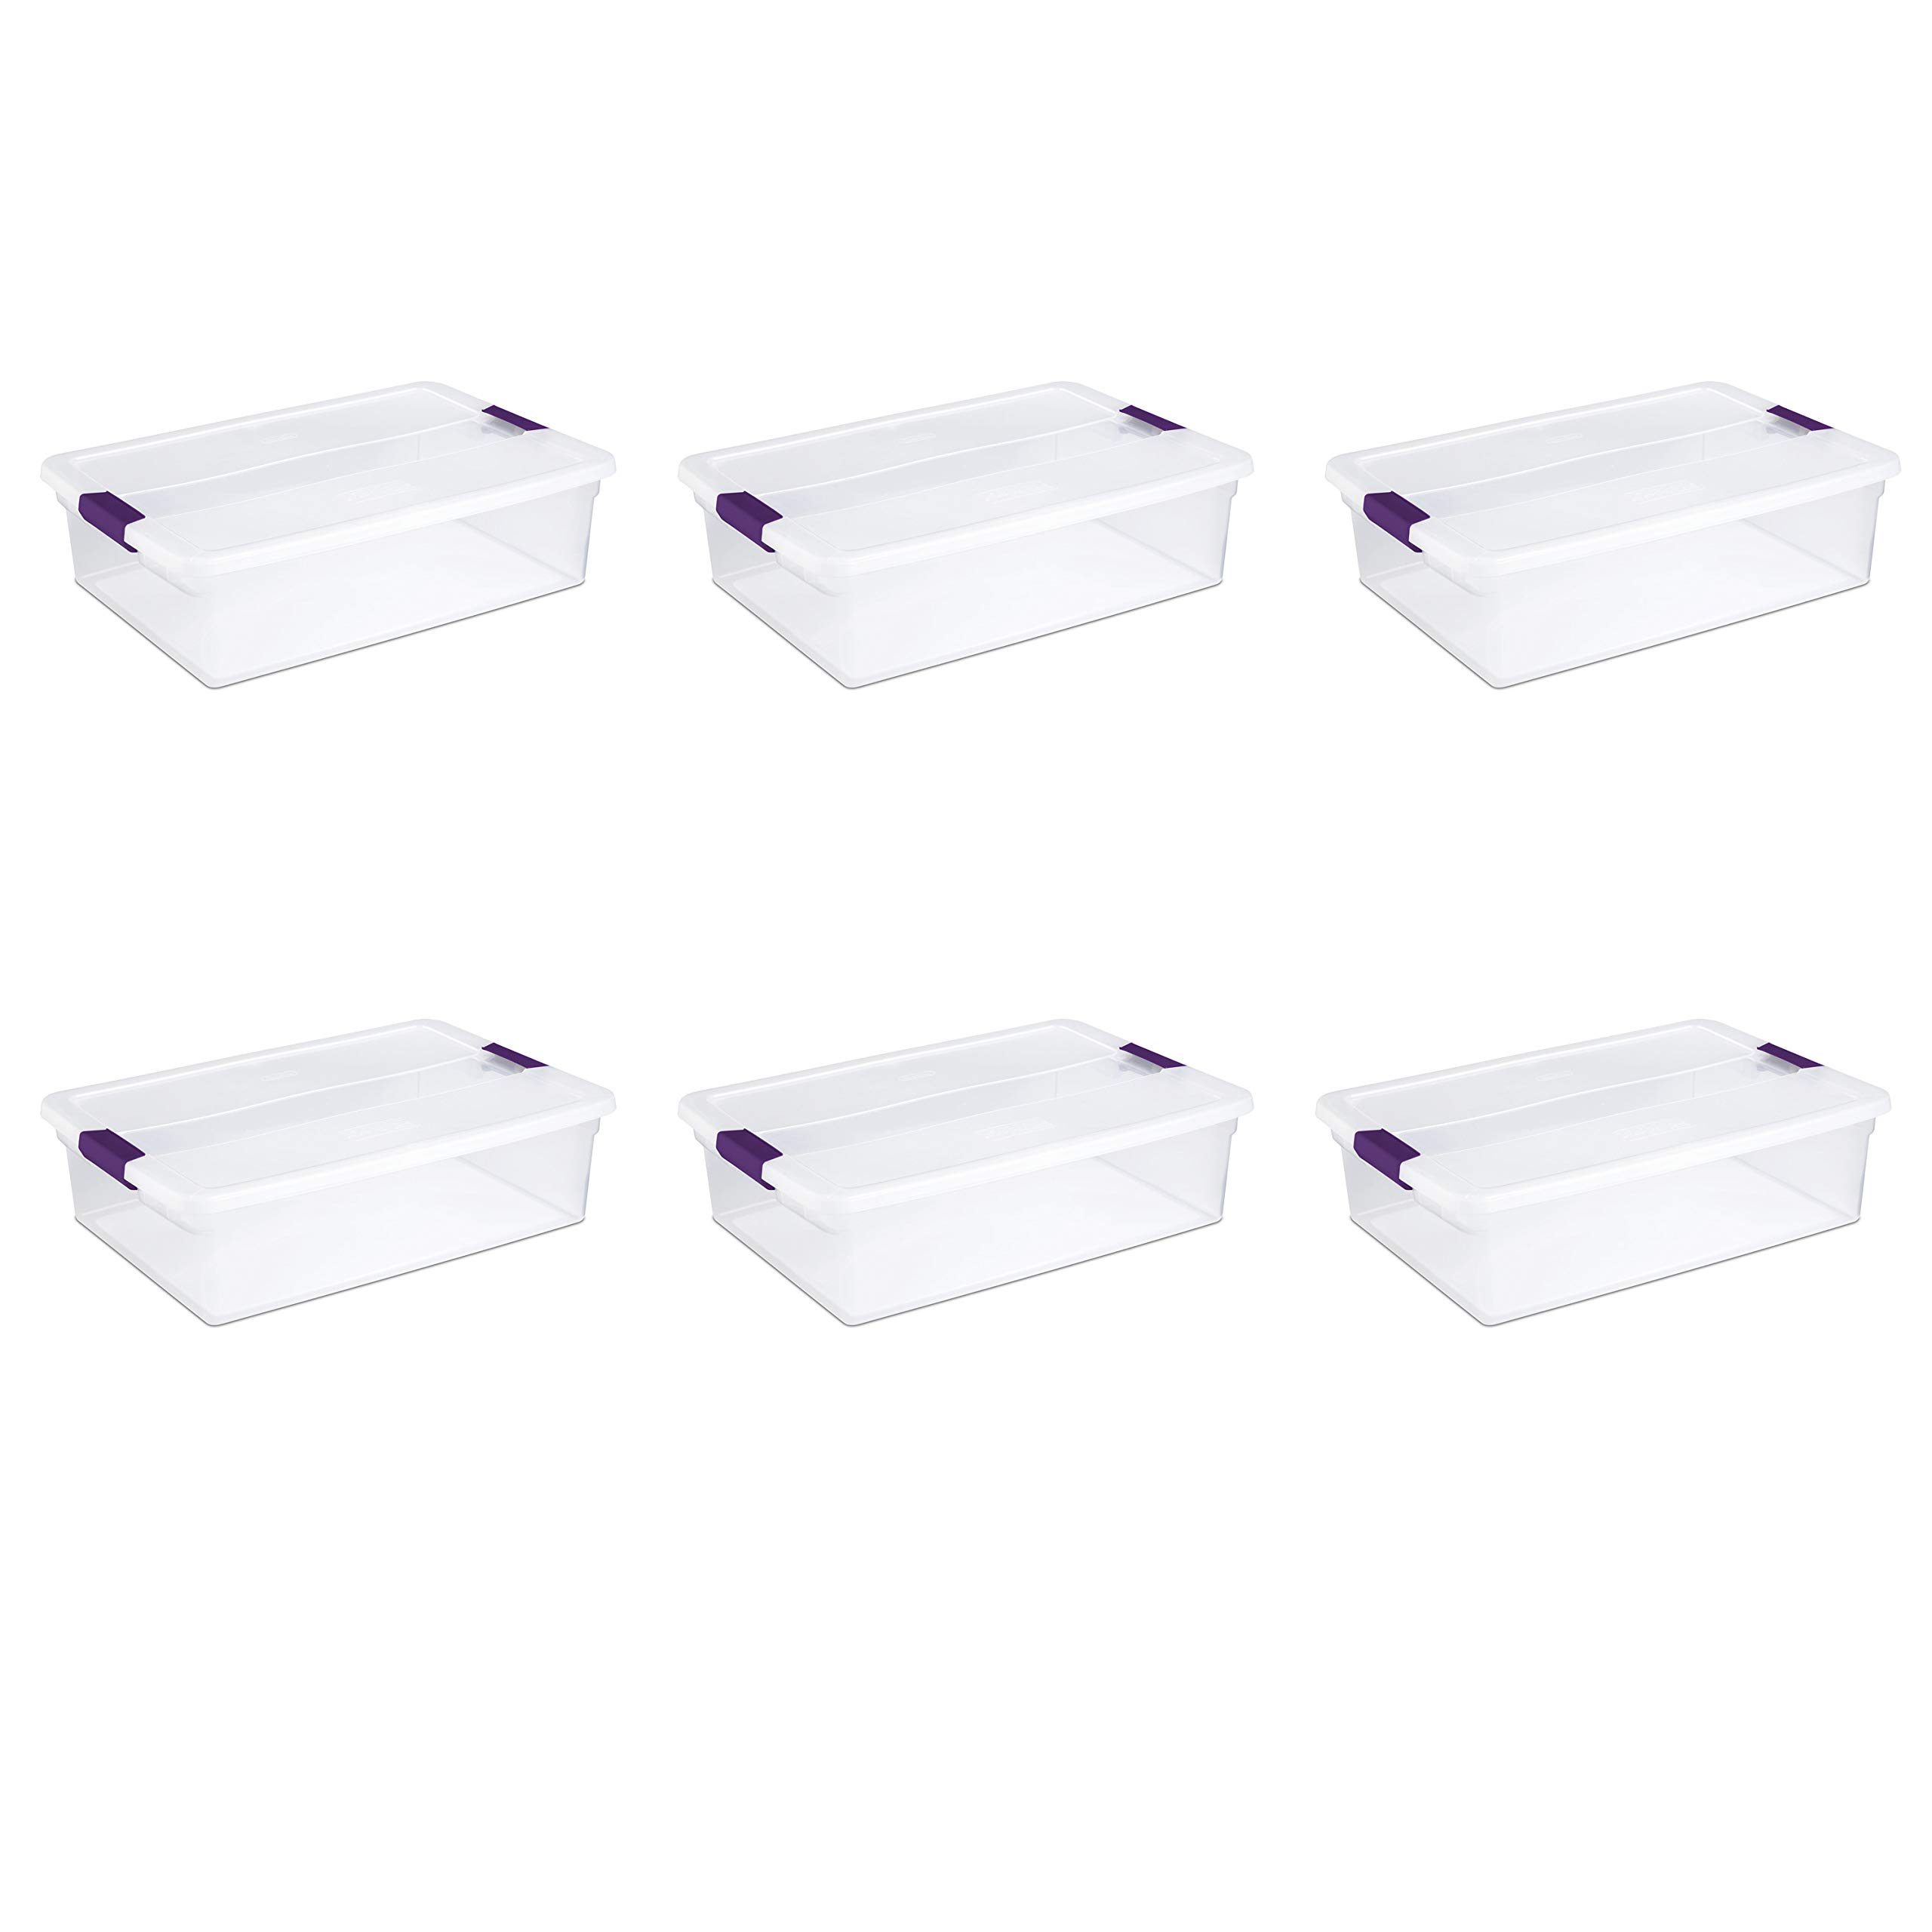 Sterilite 32 Quart ClearView Latch Box, Bin with Latching Lid, Stackable, Organize Clothes, Shoes & Accessories in Closet, Clear Base & Lid, 6-Pack